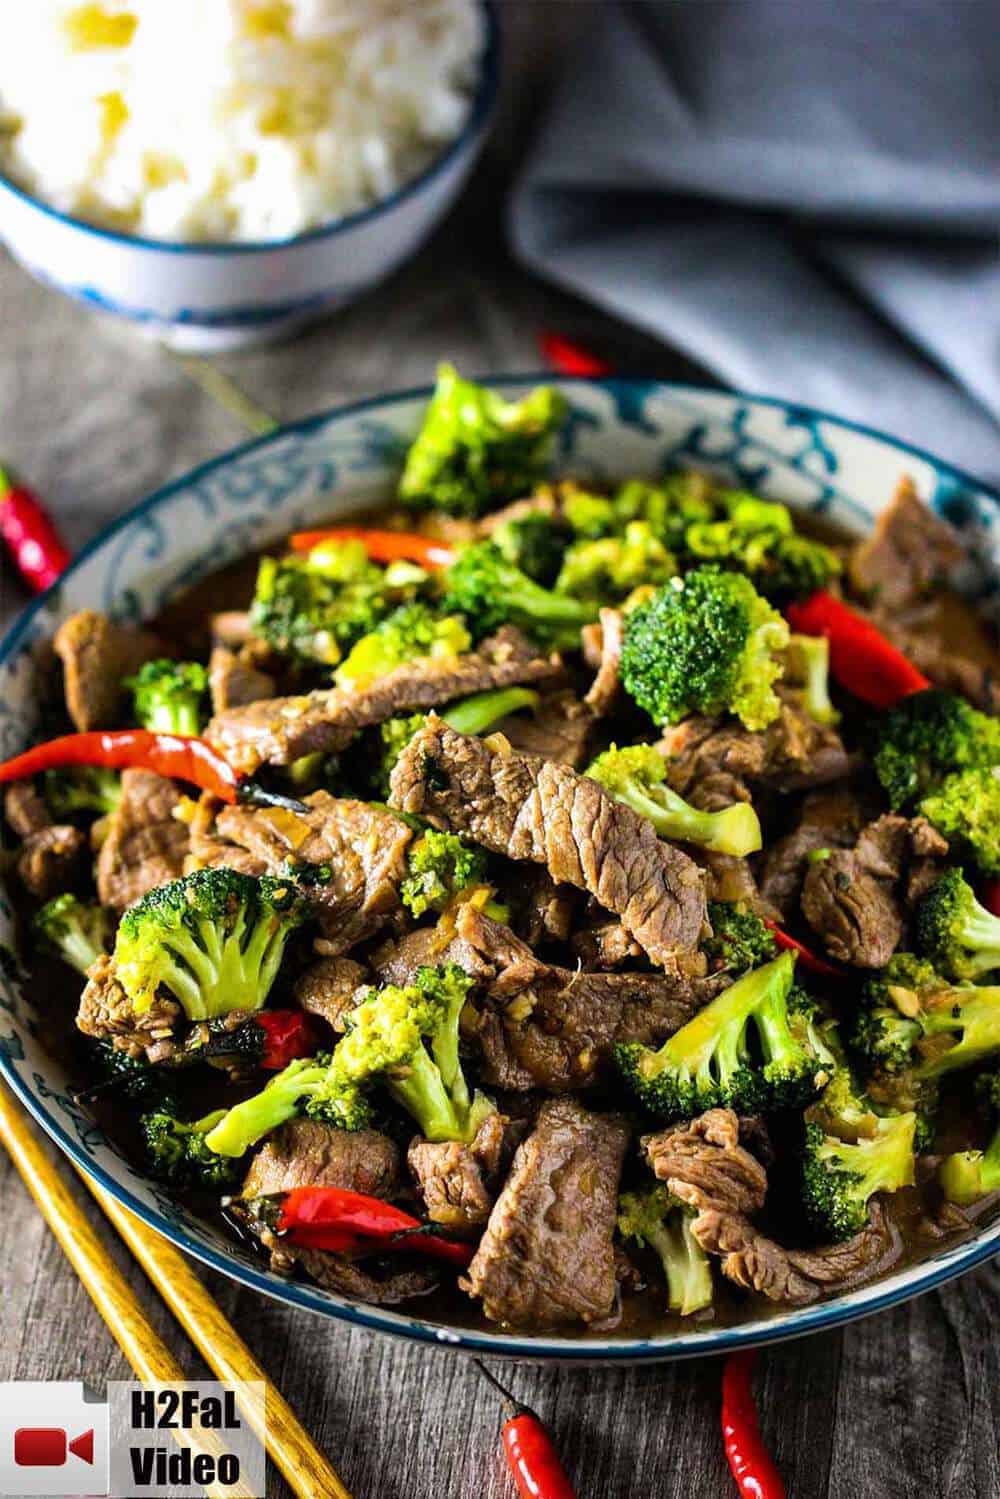 A bowl full of beef and broccoli stir-fry with chop sticks.